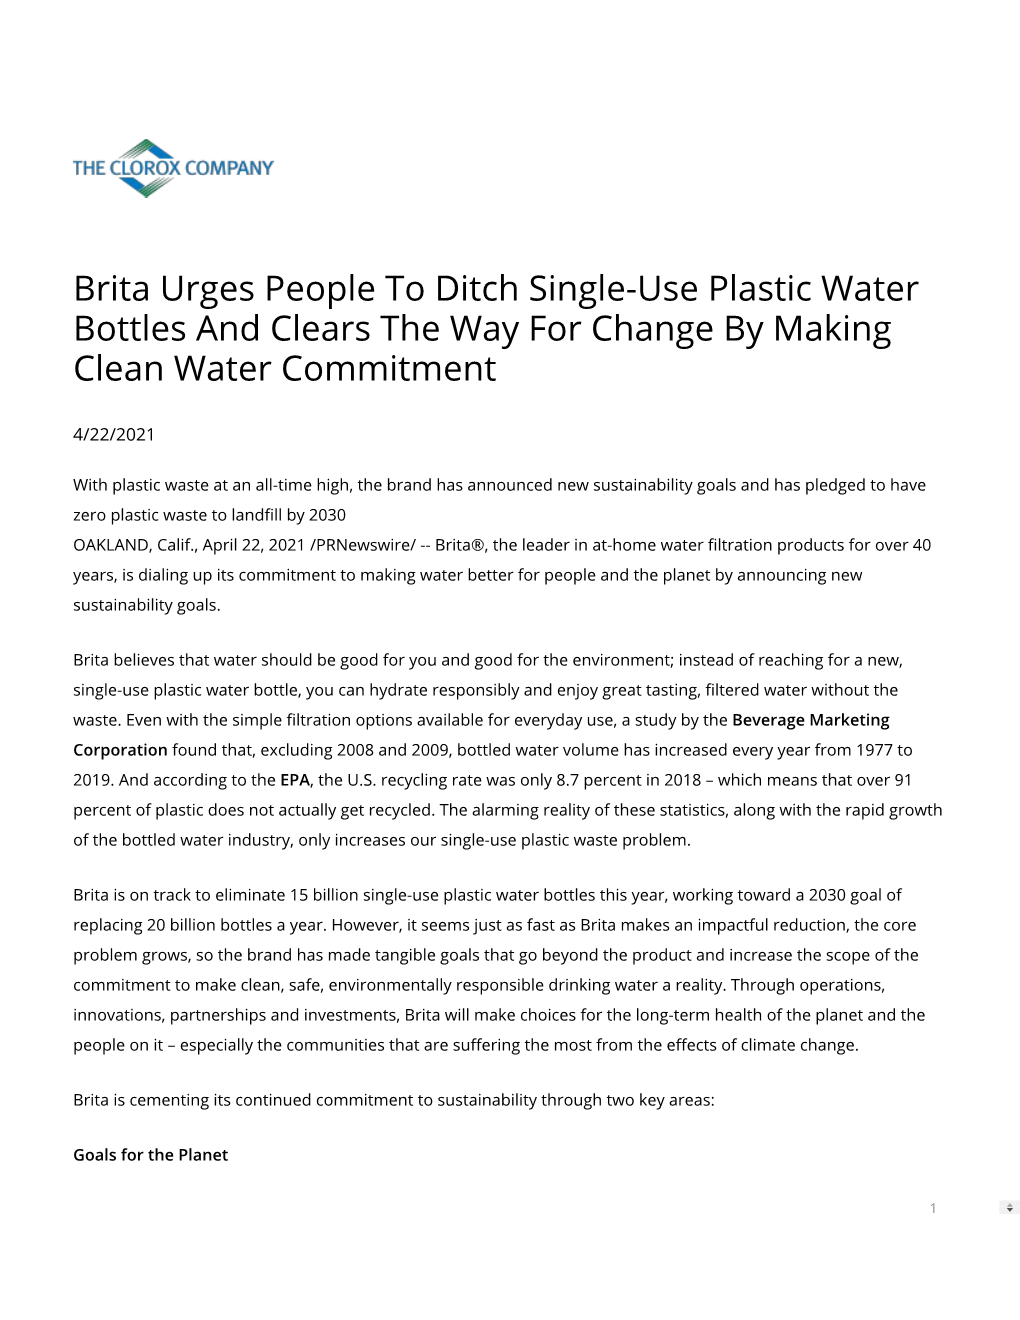 Brita Urges People to Ditch Single-Use Plastic Water Bottles and Clears the Way for Change by Making Clean Water Commitment